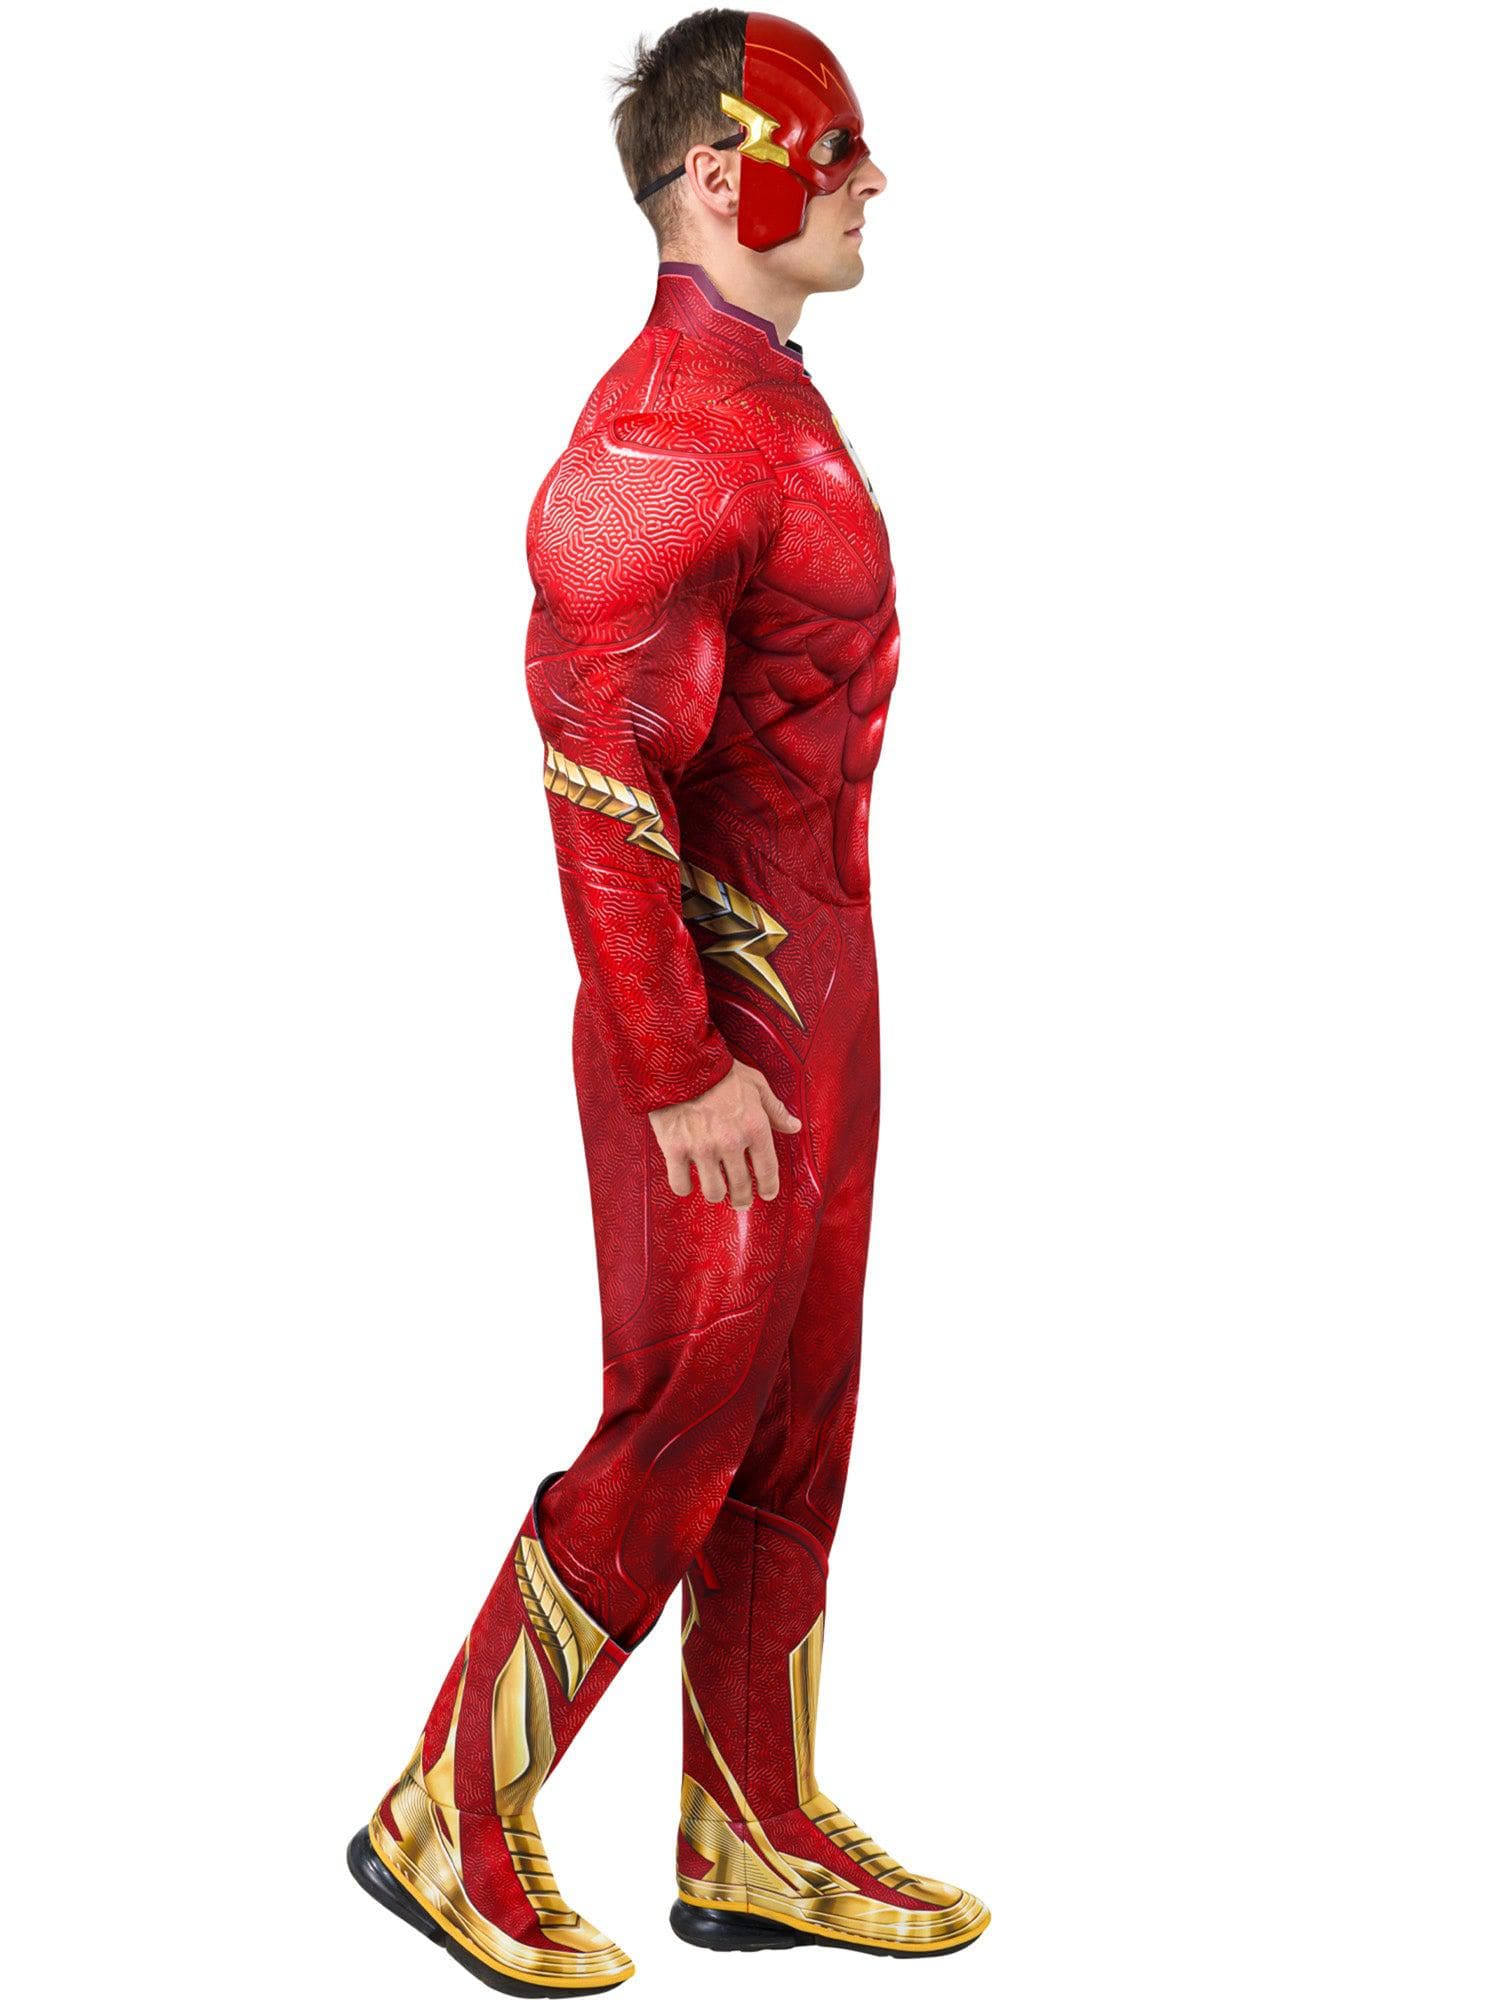 The Flash Deluxe Adult Costume - costumes.com